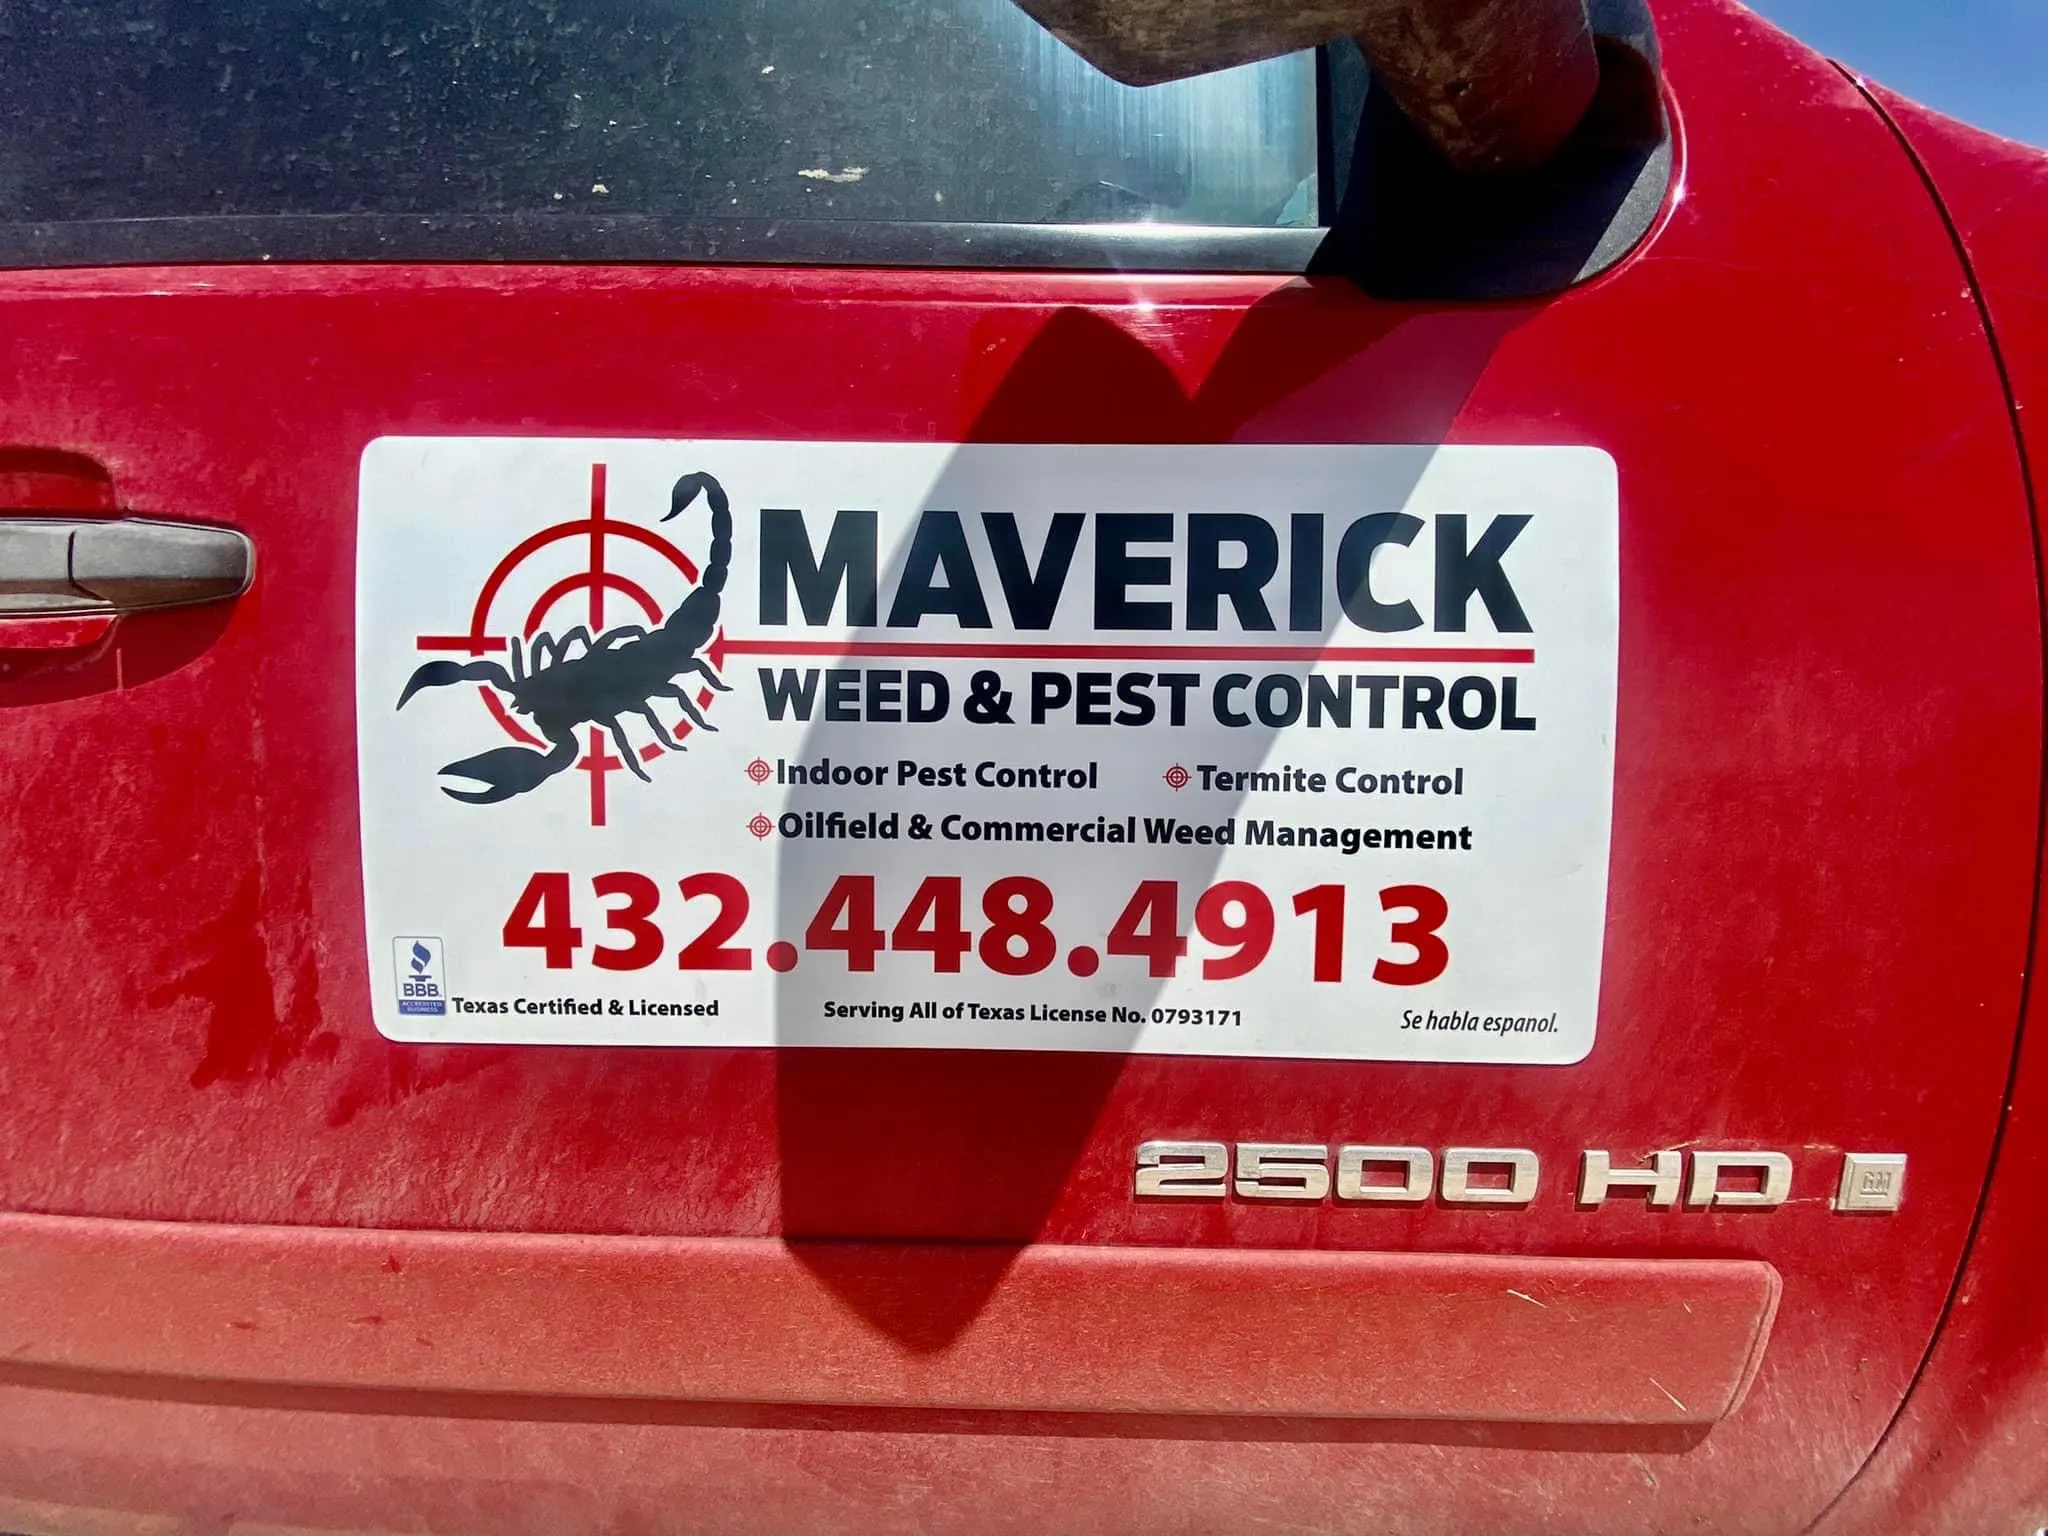 R.O.W. Vegetation Management for Maverick Weed & Pest Control in All of Texas, TX